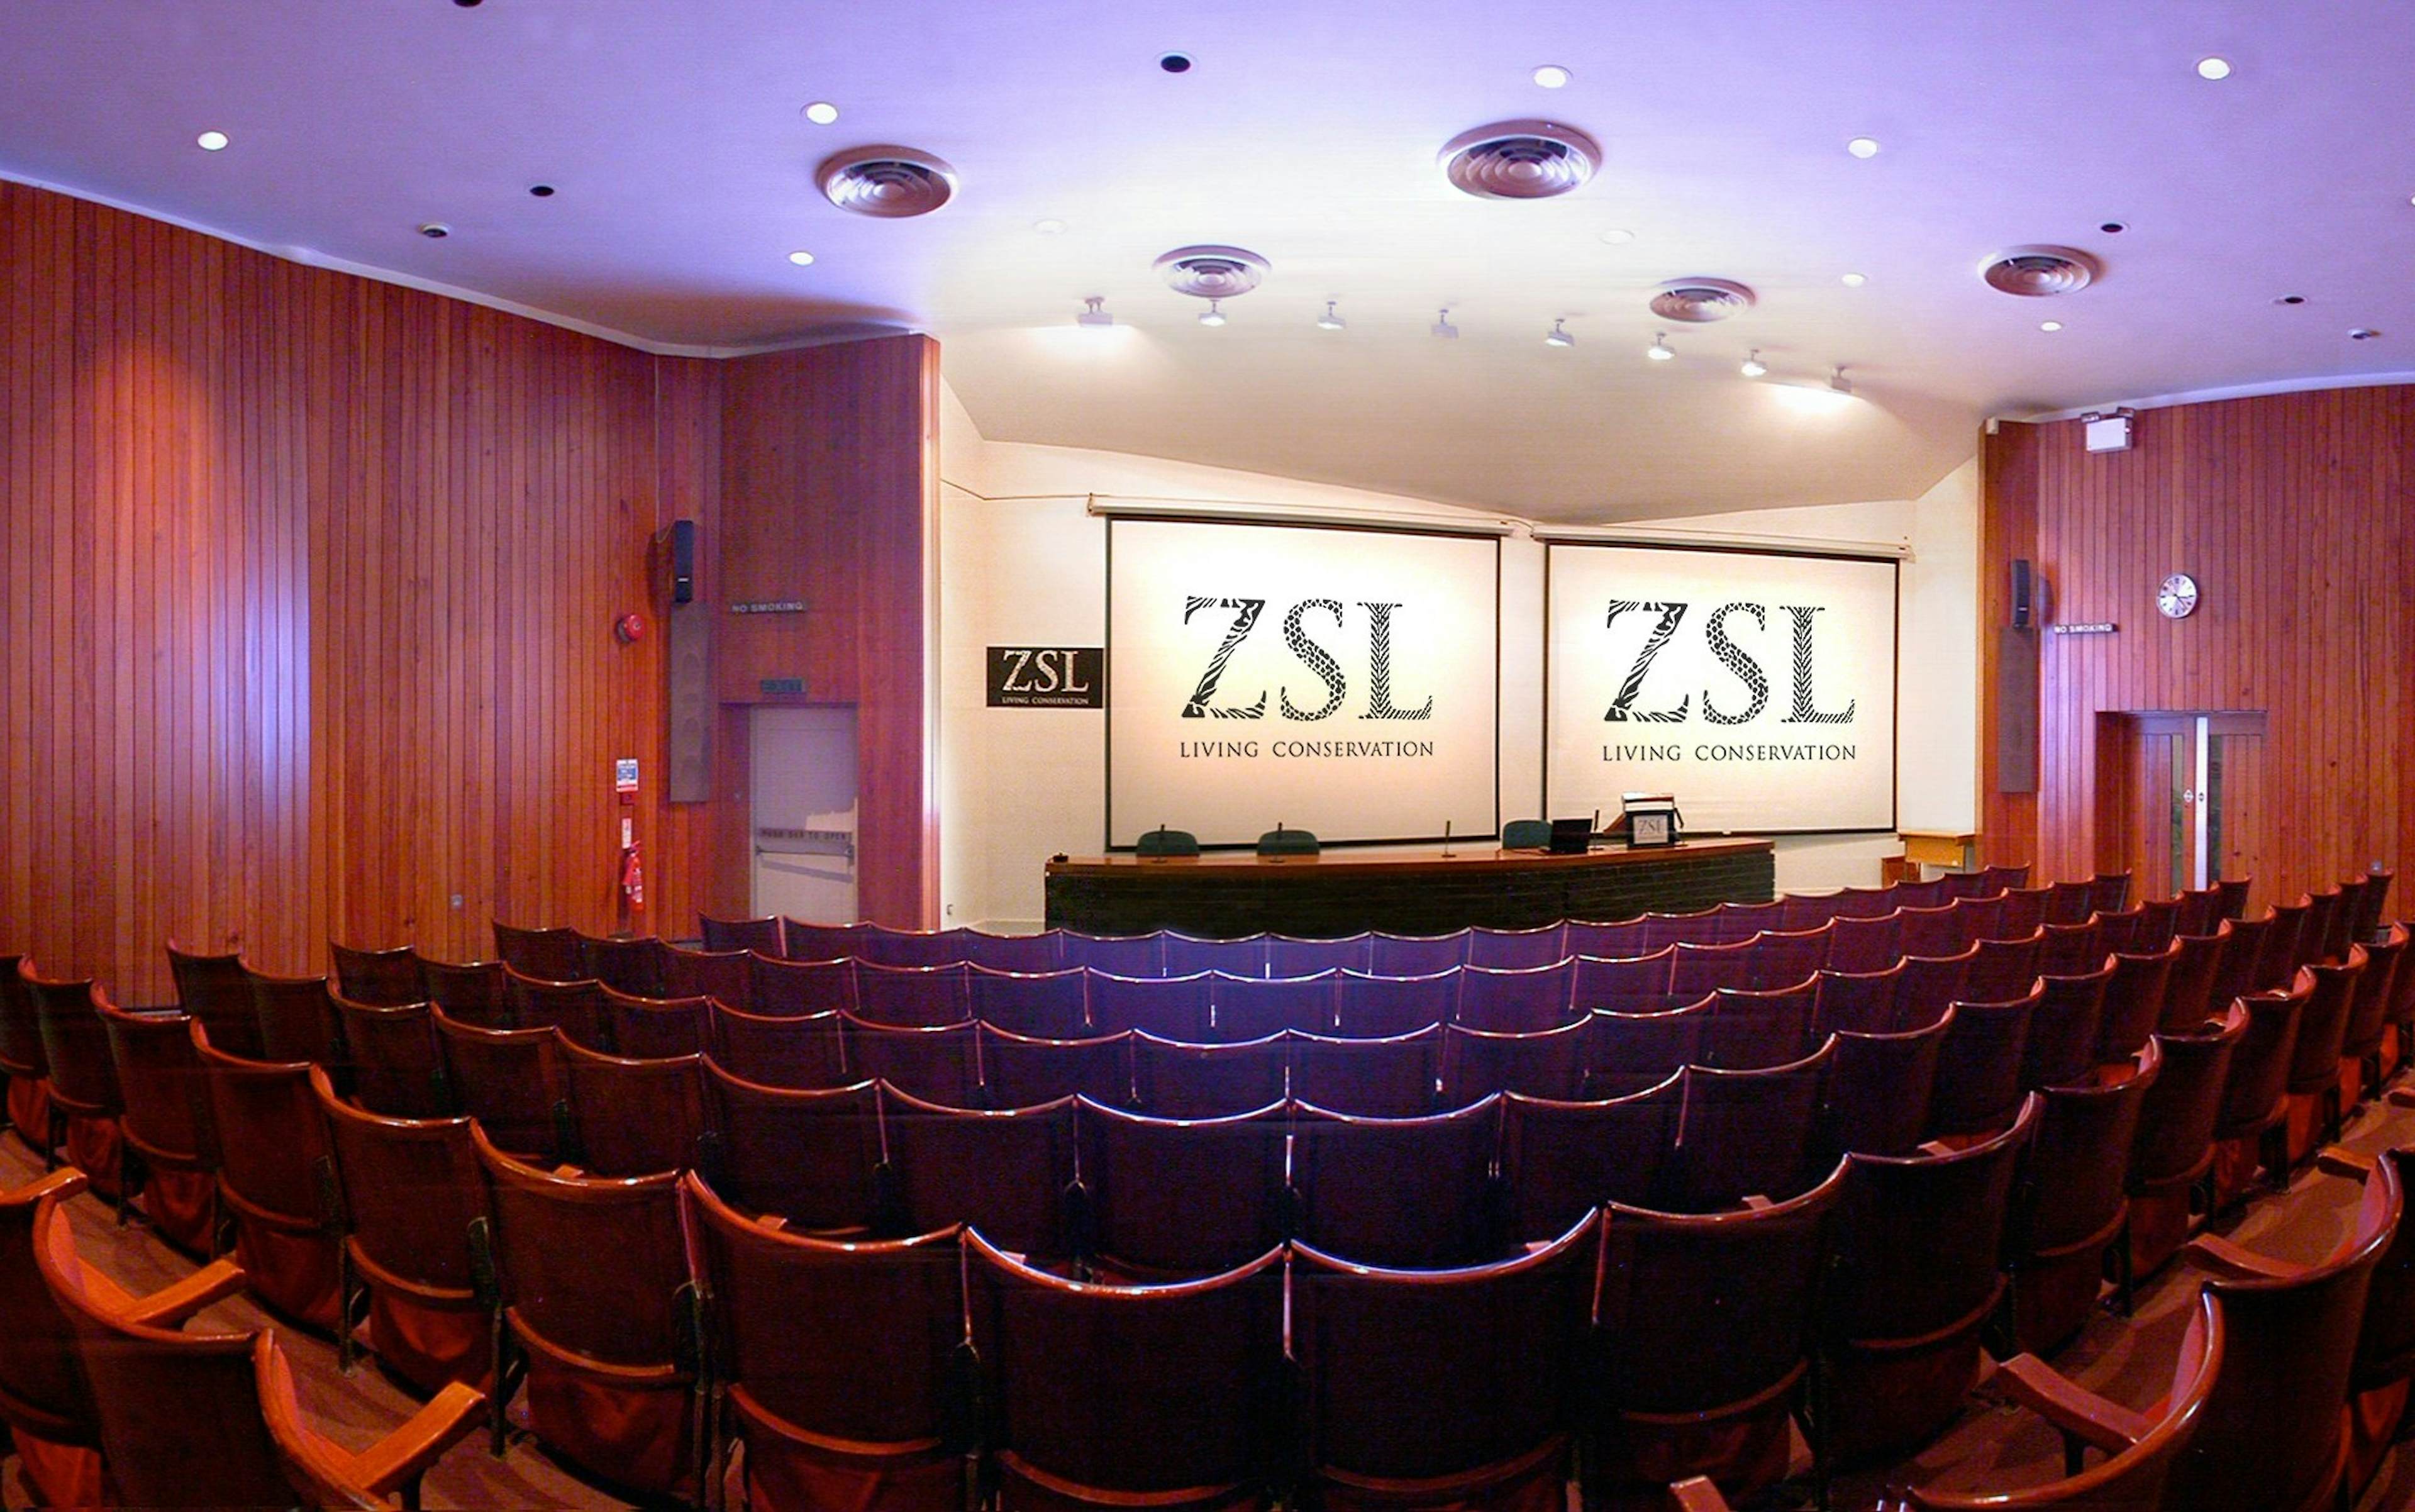 ZSL London Zoo - Huxley Theatre and Bartlett Suite image 1